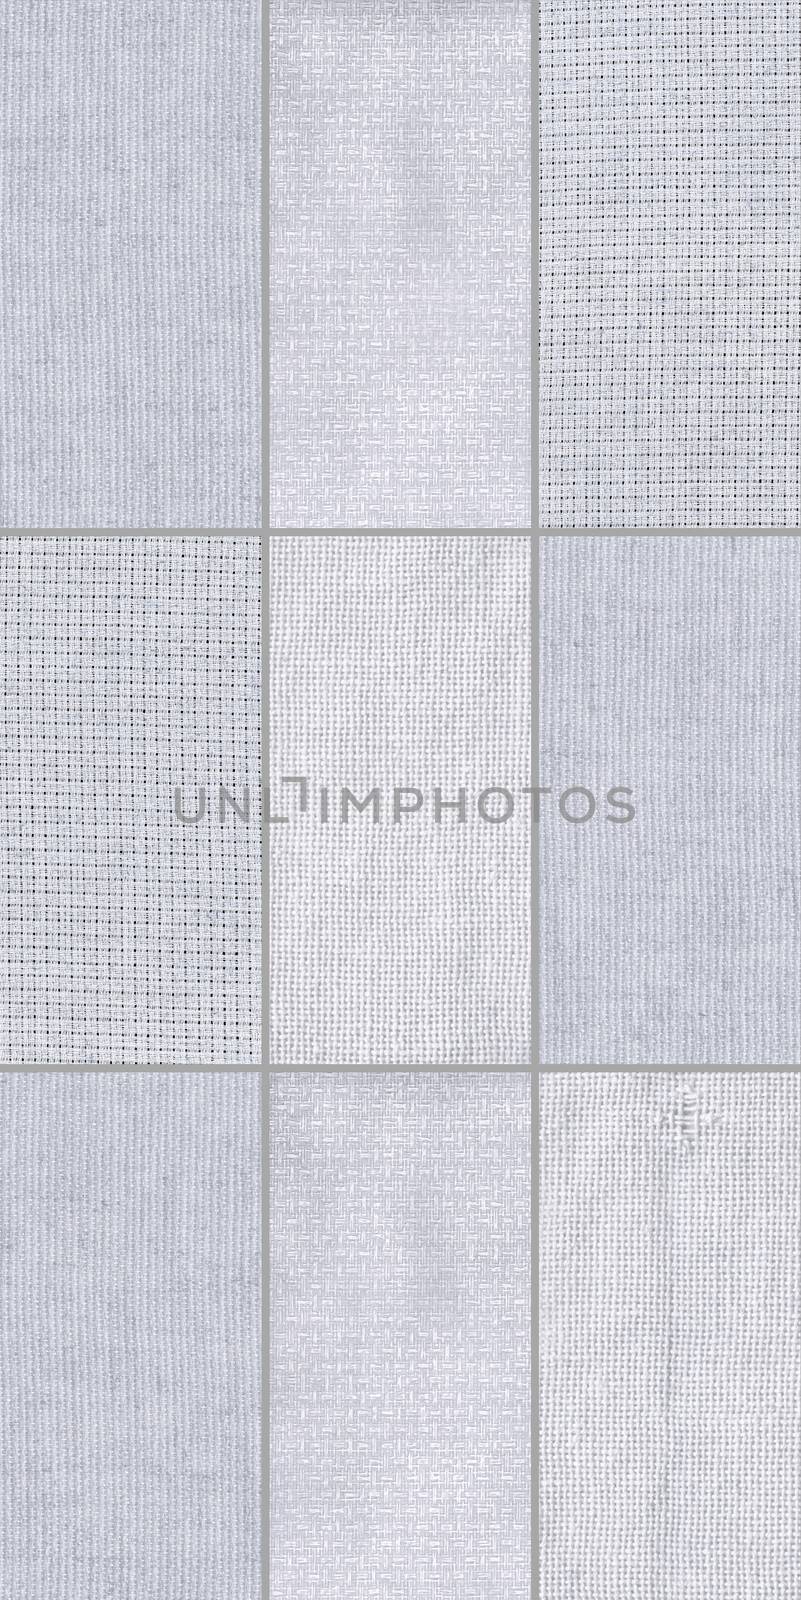 Fabric pattern texture background. (high.res) by mg1408